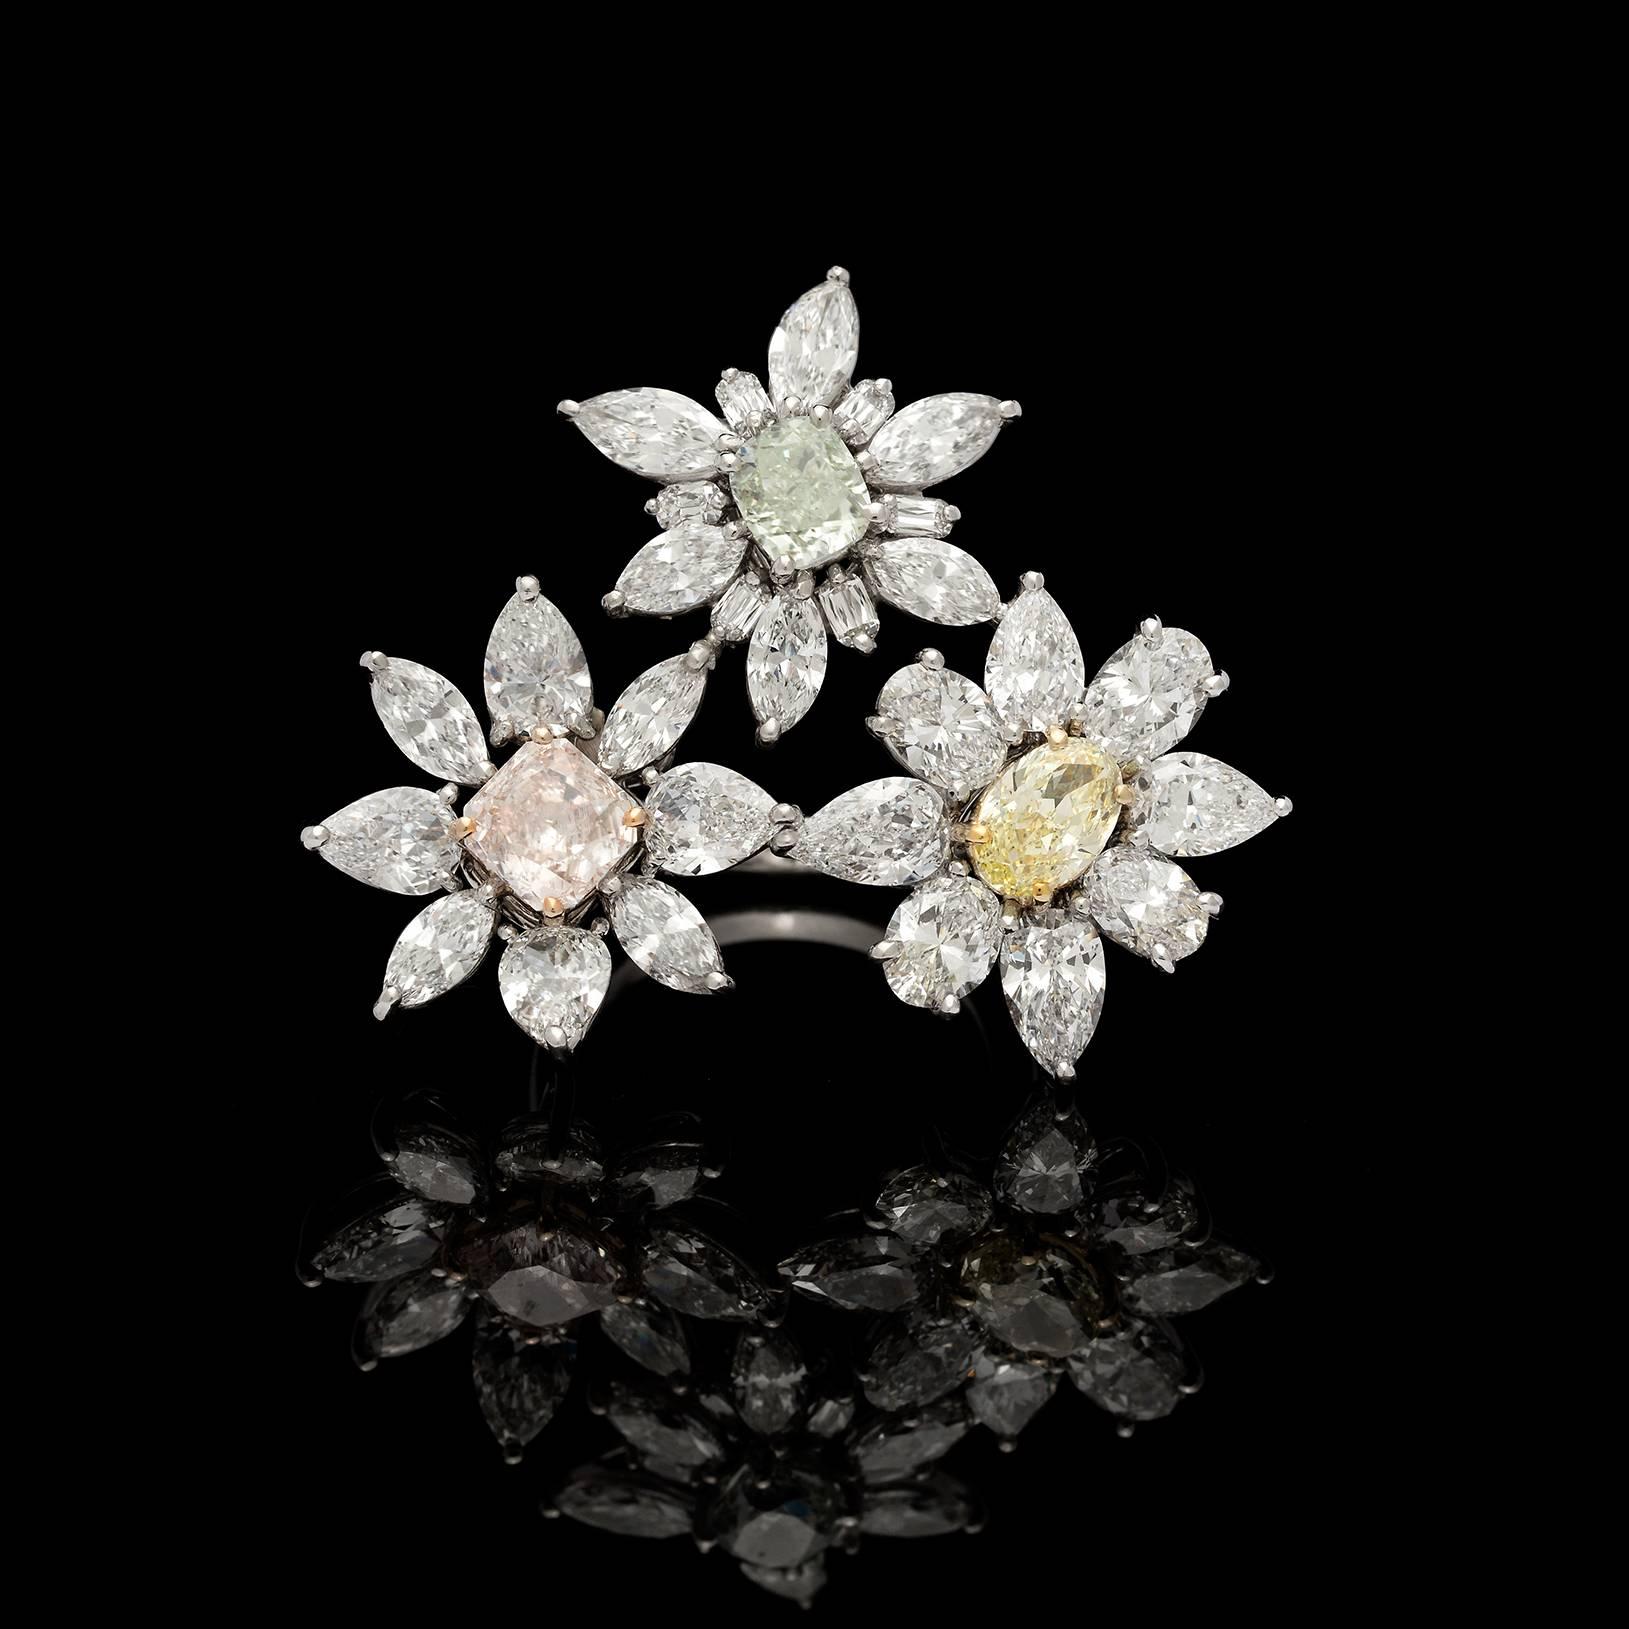 This eye-catching platinum ring is designed with three flowers, each showcasing a rare Fancy Colored Diamond (a GIA 0.84-ct. fancy light yellow oval-shaped diamond, an IGI 1.09-ct. fancy light pink radiant-cut diamond, and a GIA 0.95-ct. fancy light